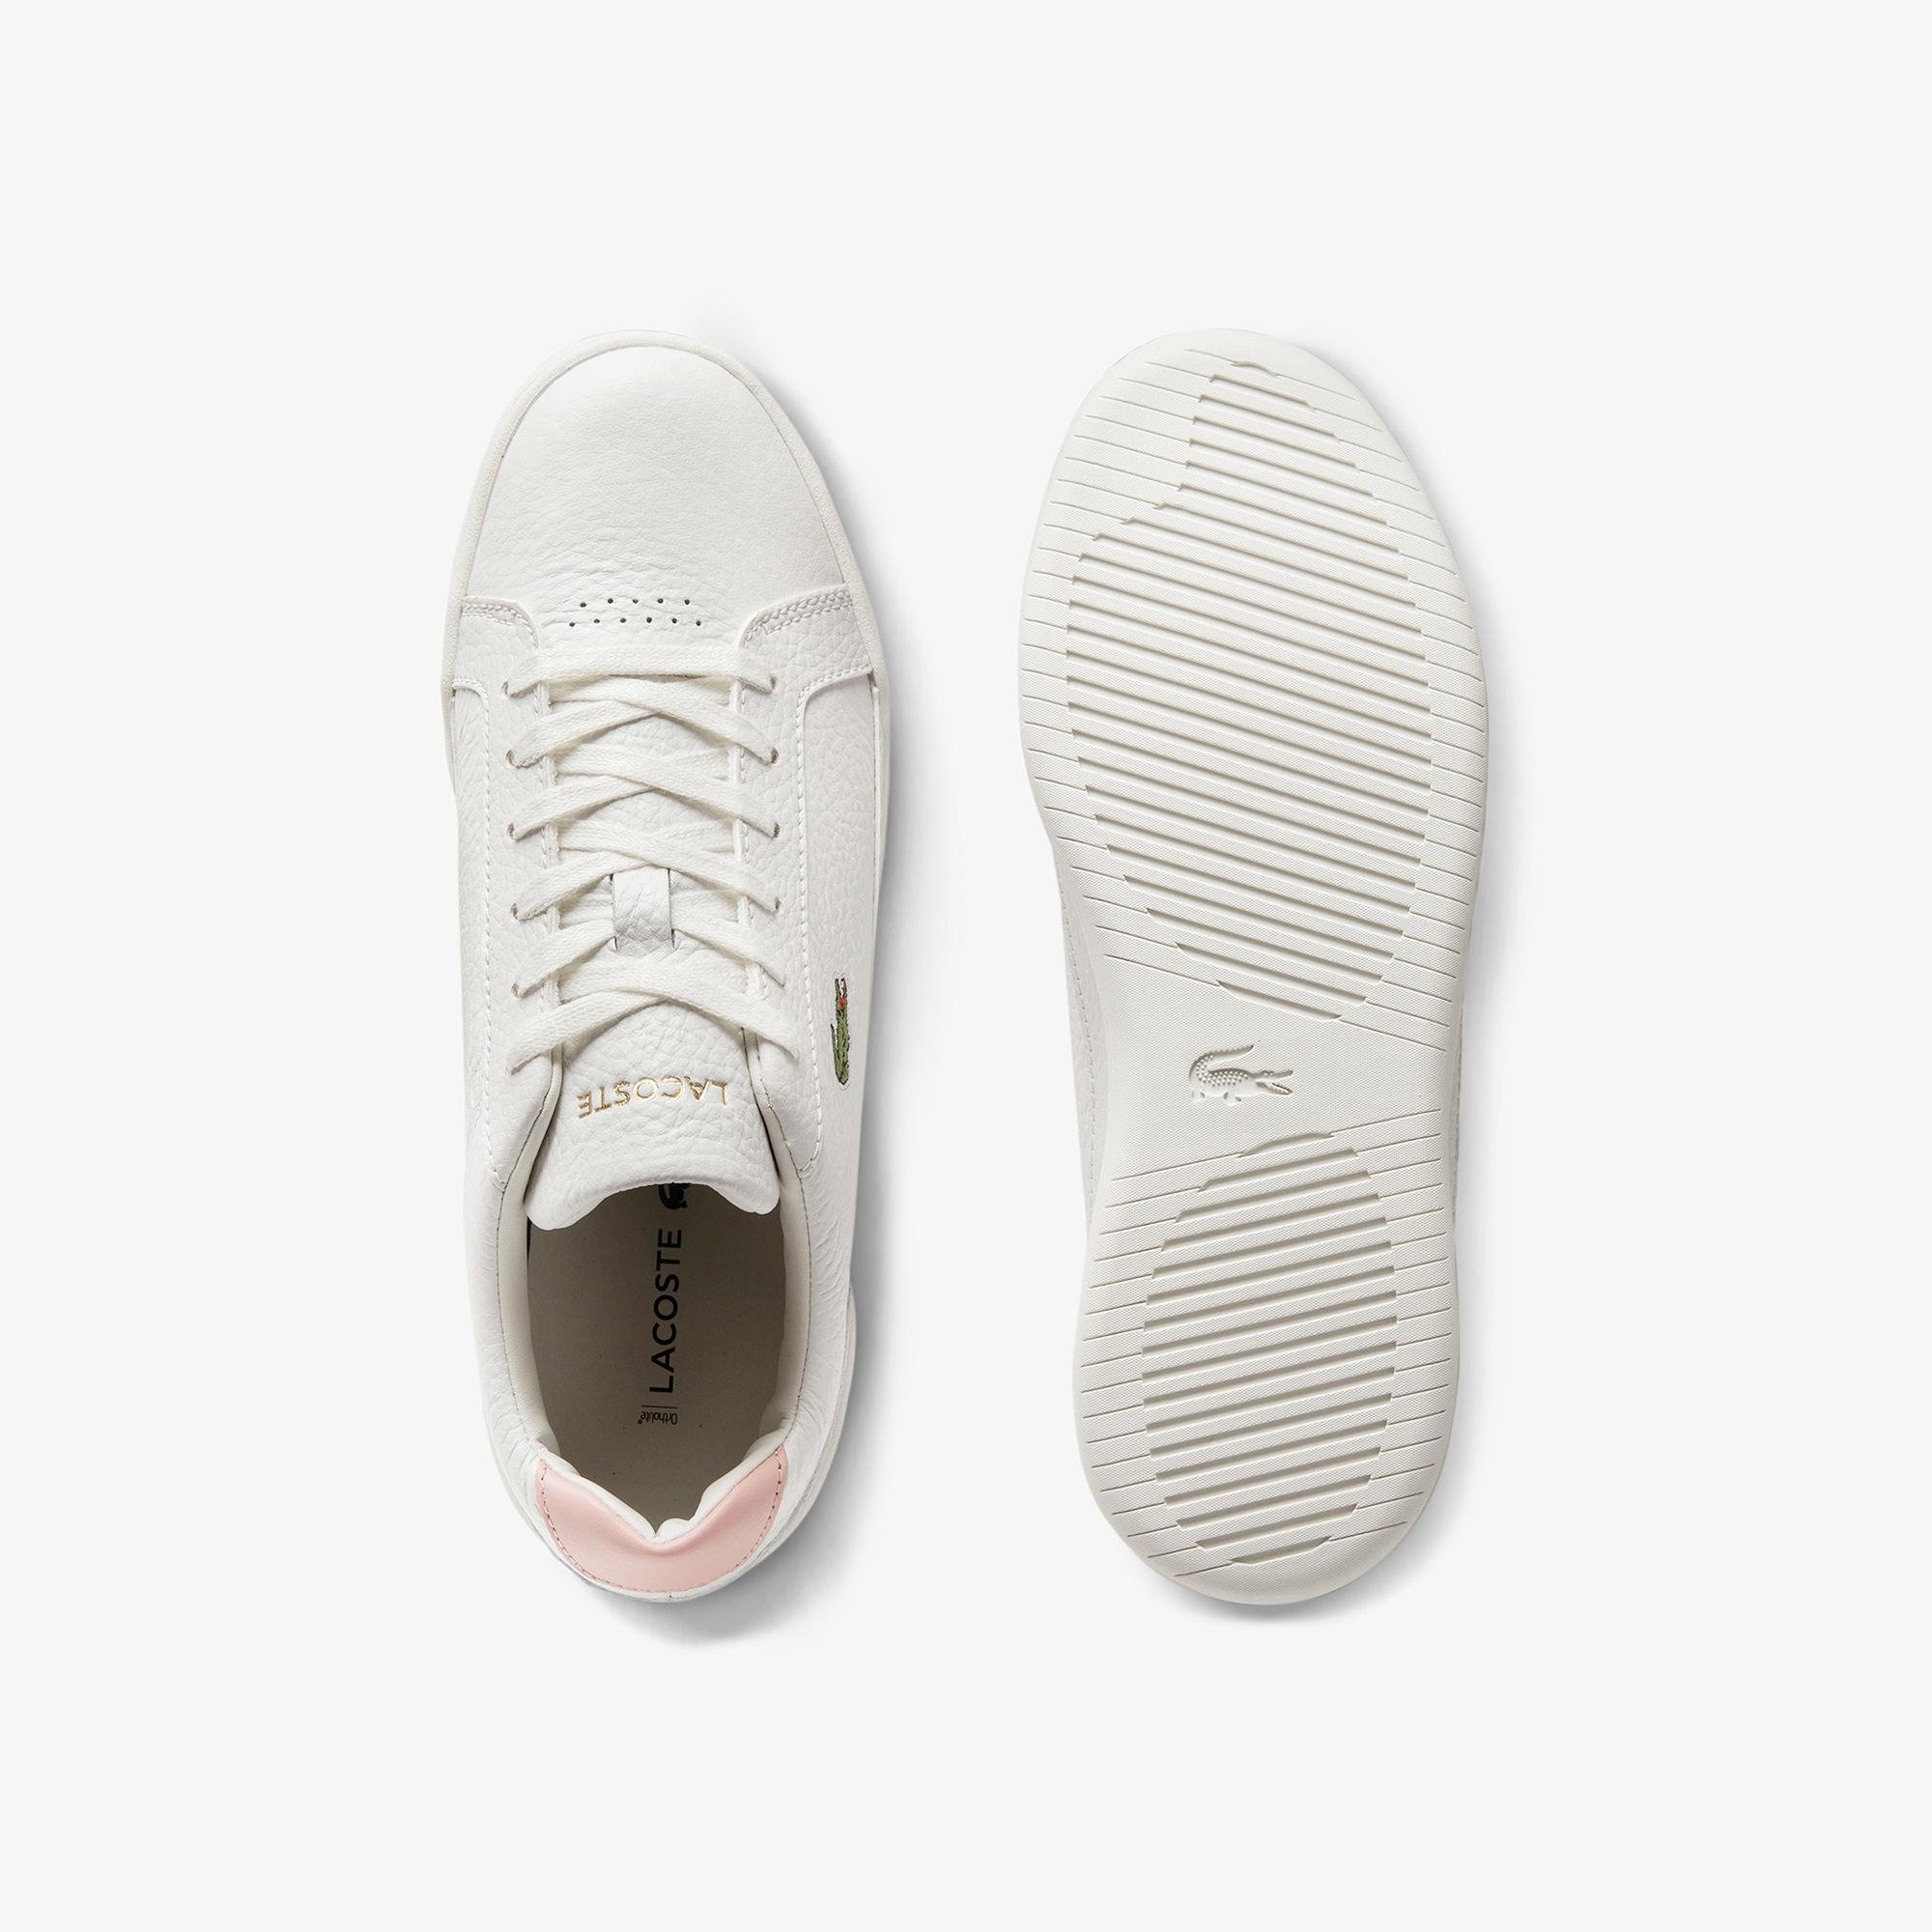 Lacoste Women's Challenge Leather and Synthetic Sneakers